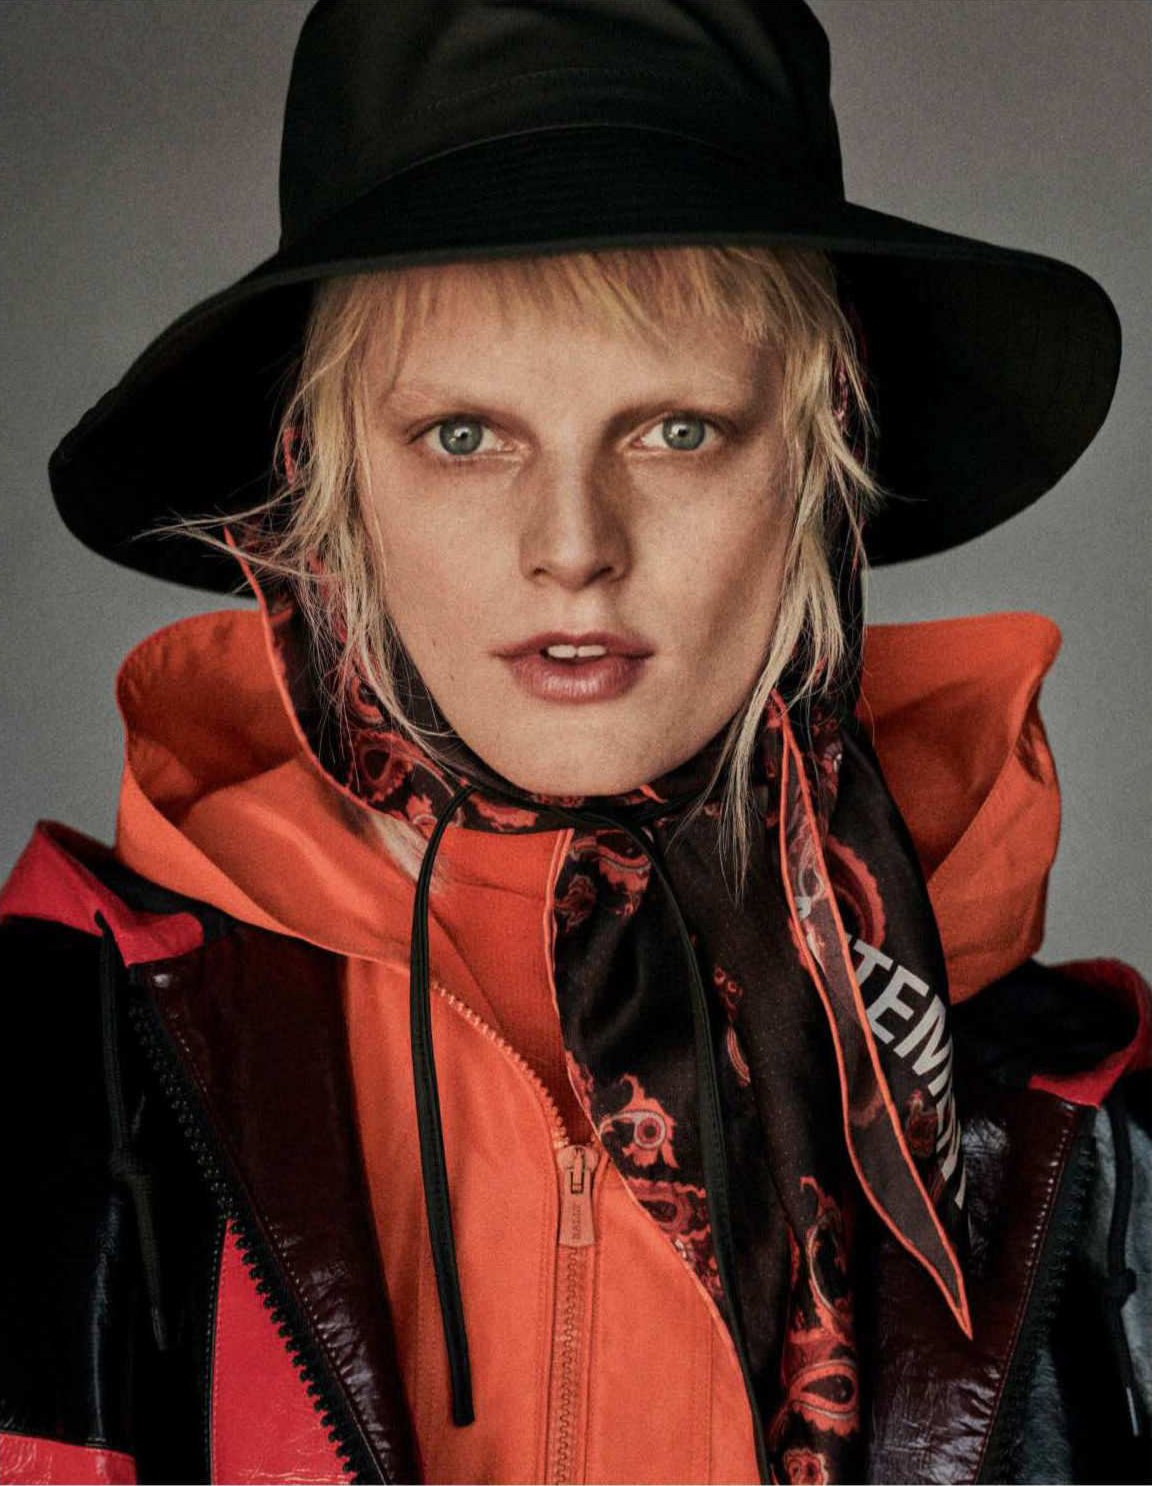 Hanne Gaby Odiele by Giampaolo Sgura for Vogue Germany Sept 2018 (2).jpg